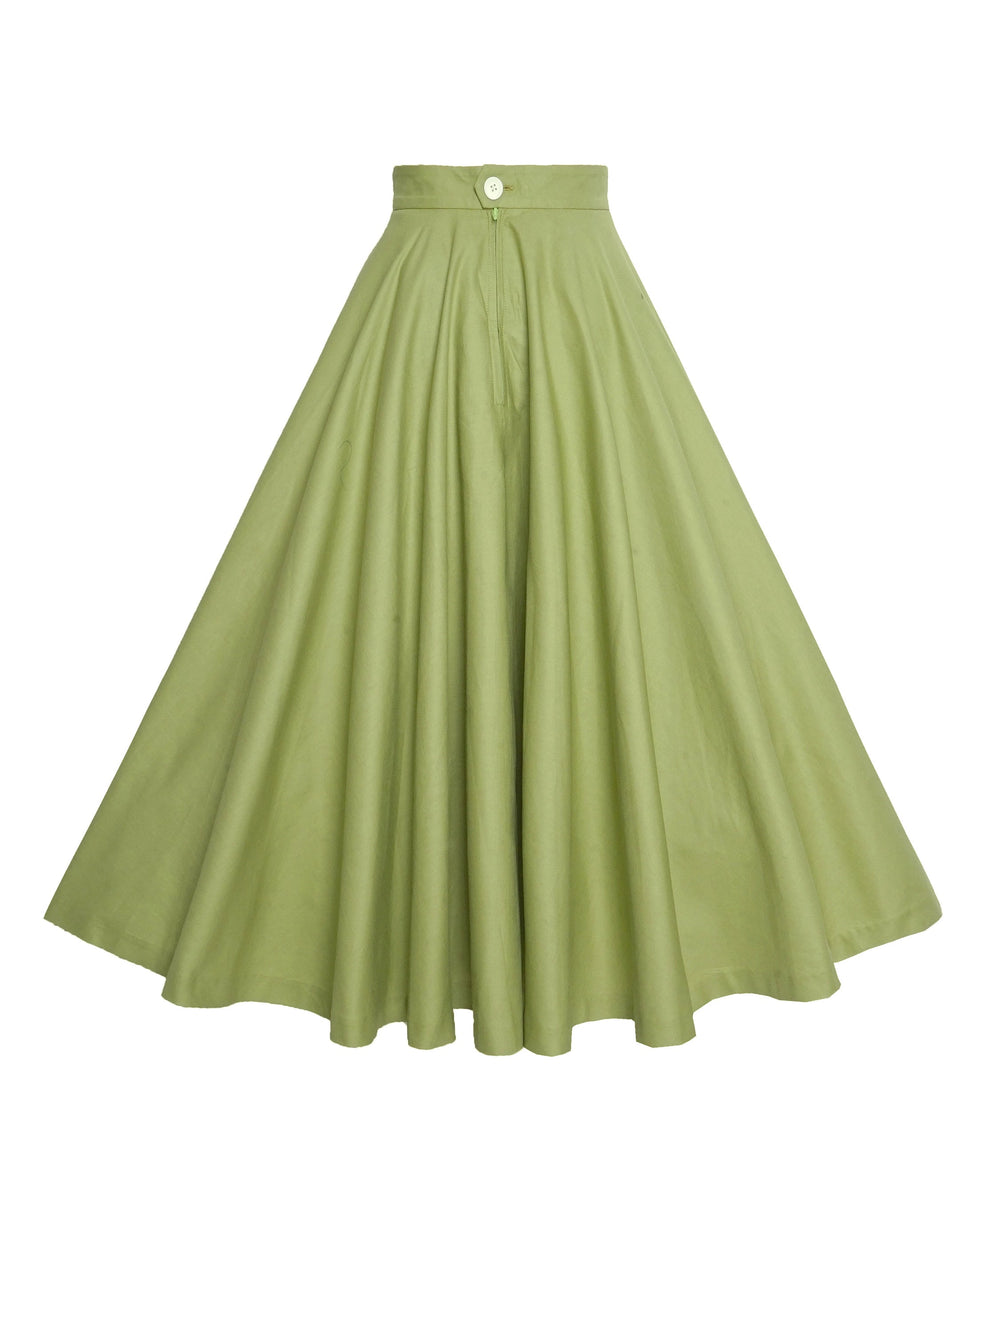 RTS - Size L - Lindy Skirt in Matcha Green Cotton